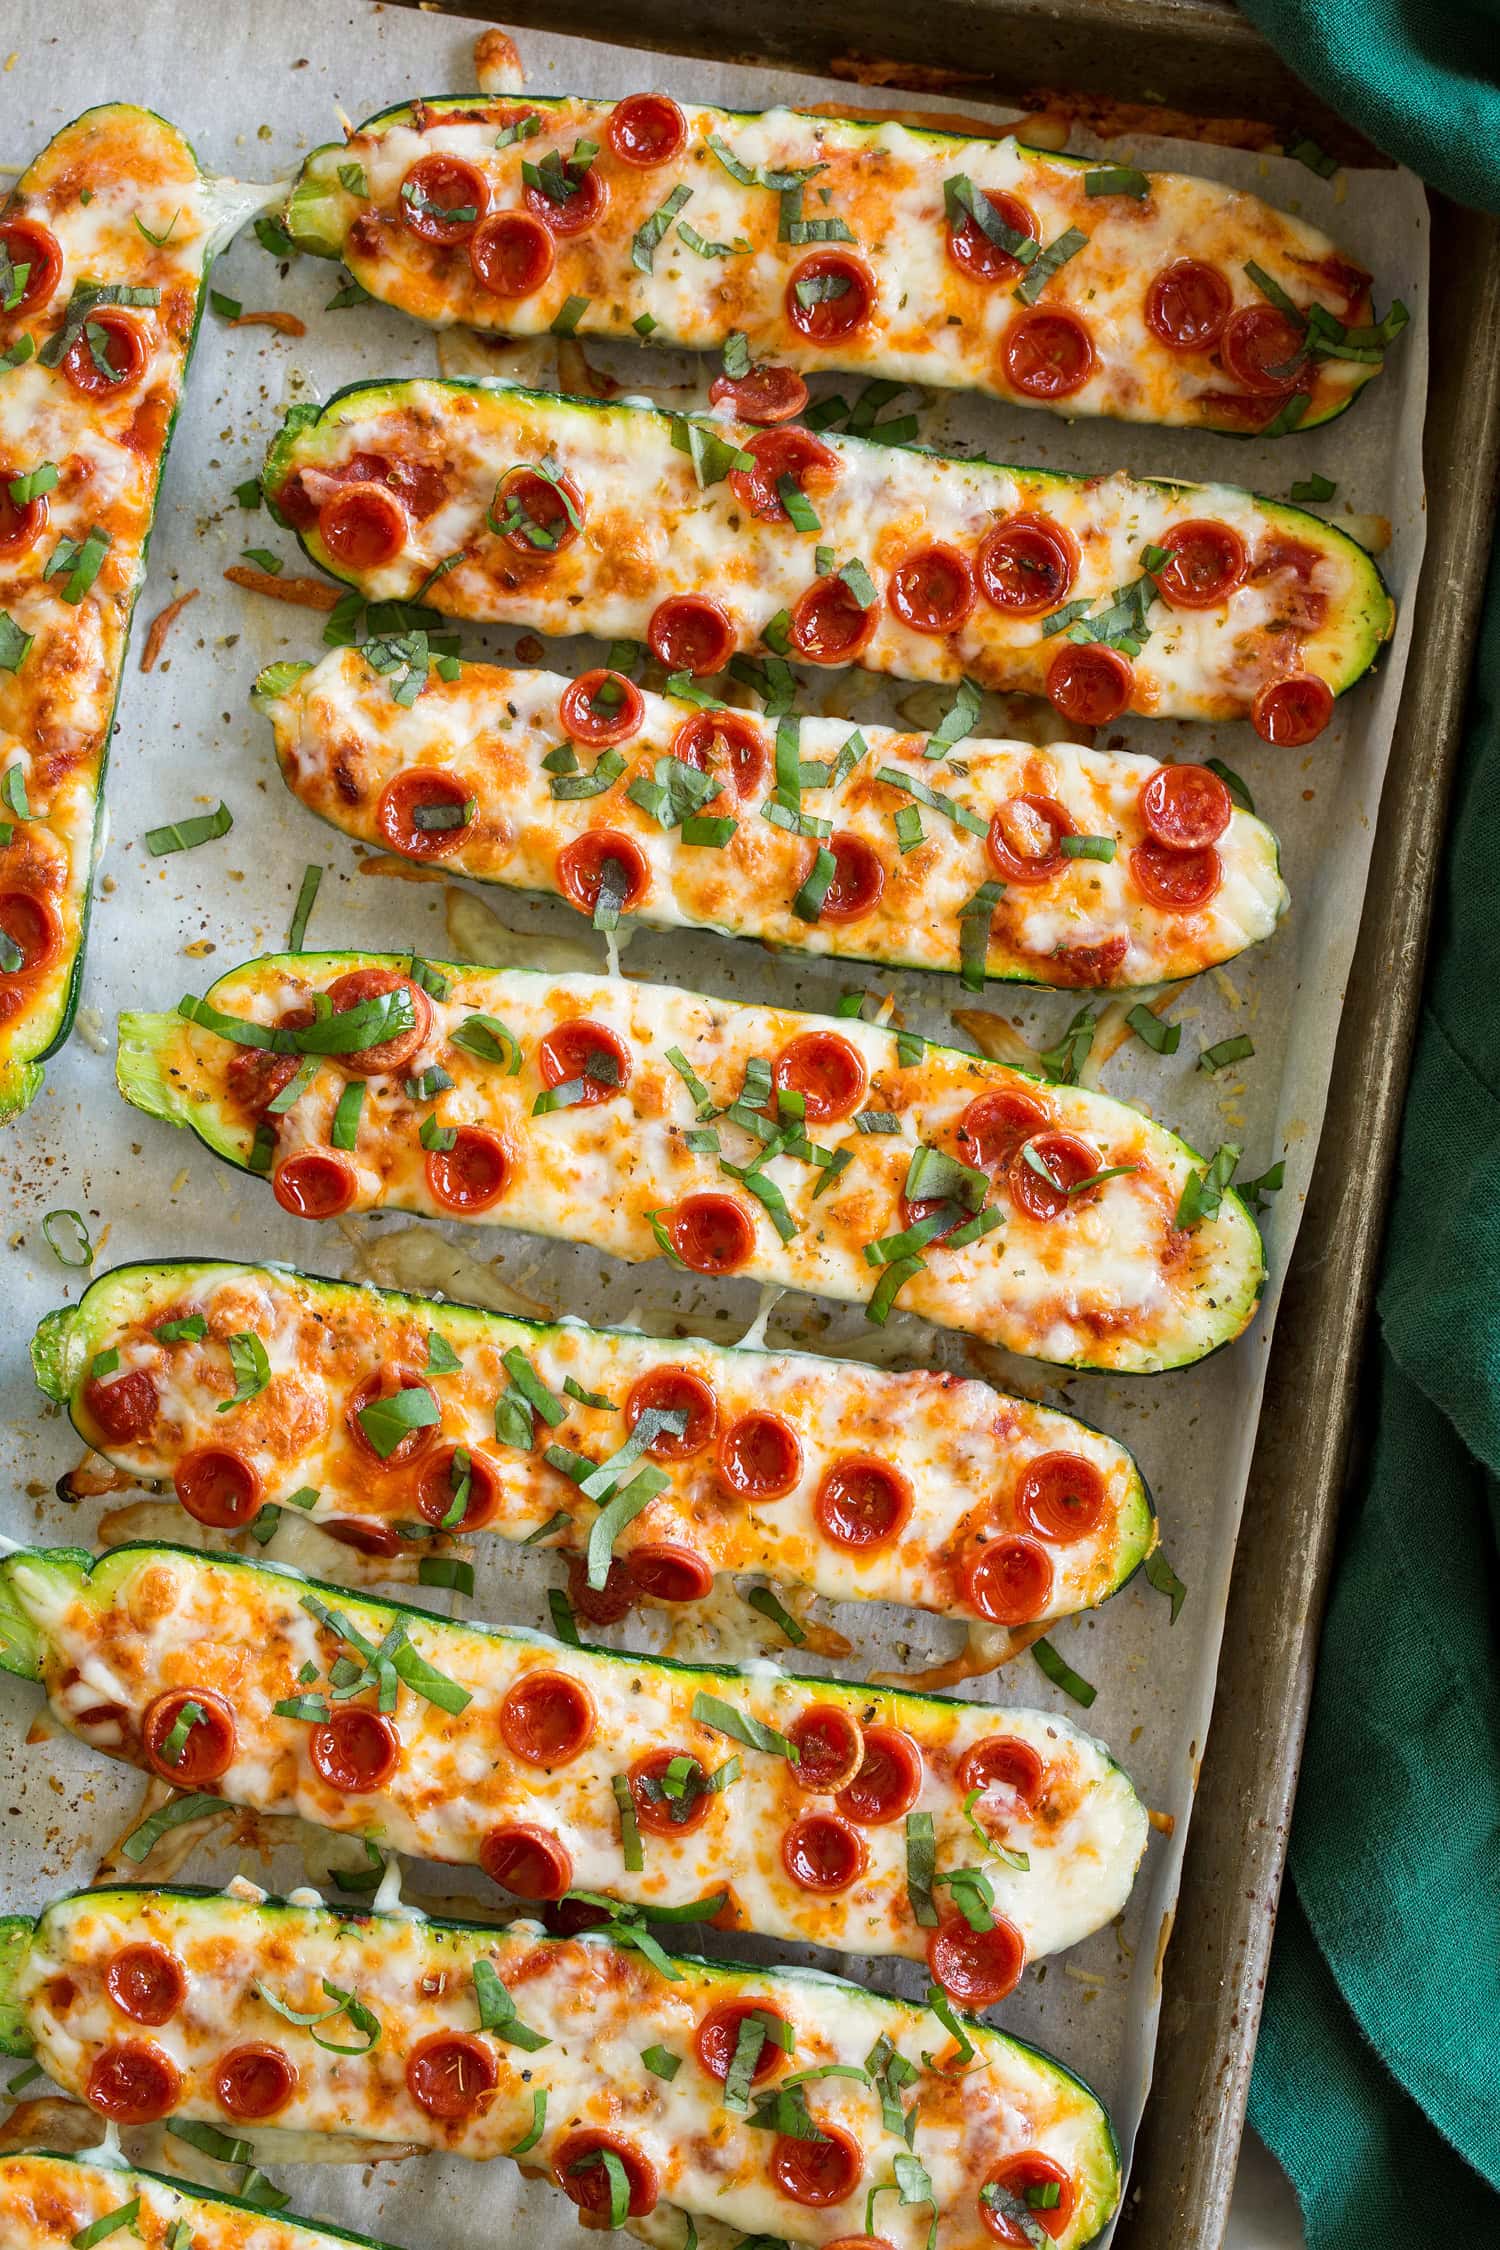 Zucchini halves with melted mozzarella, pizza sauce, pepperoni, and basil on top.